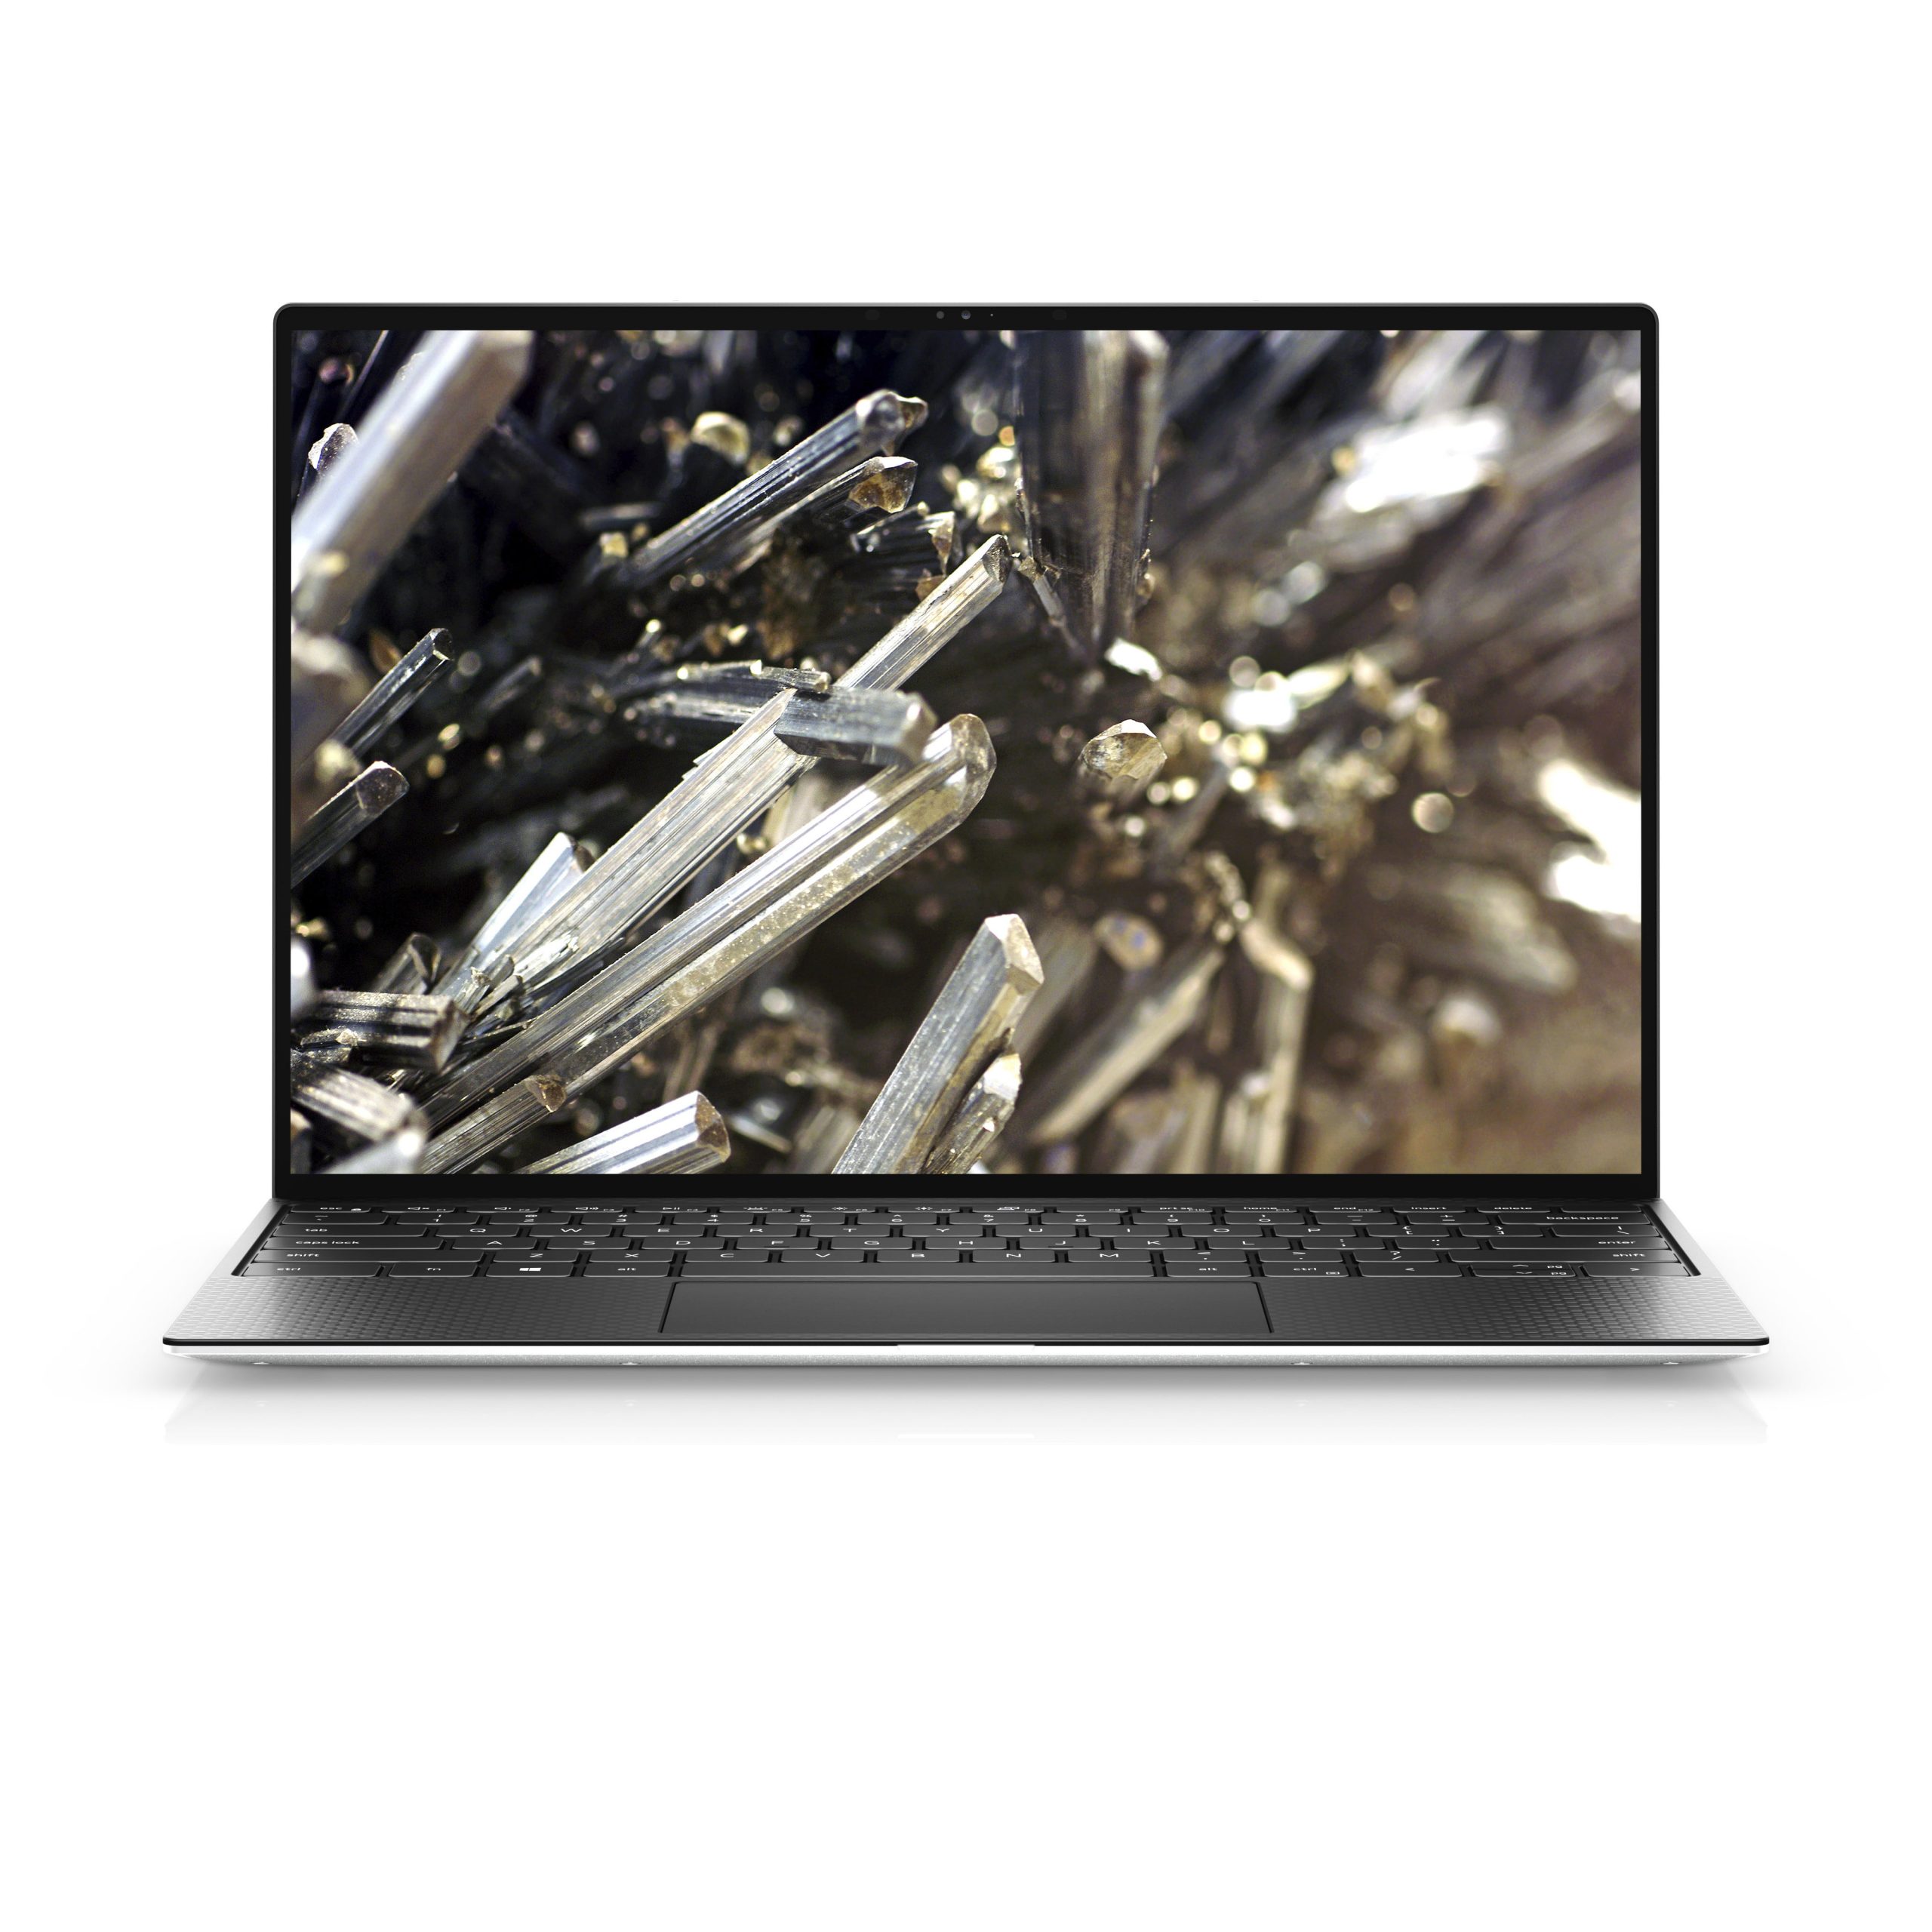 Dell is virtually releasing the Dell XPS laptop now!